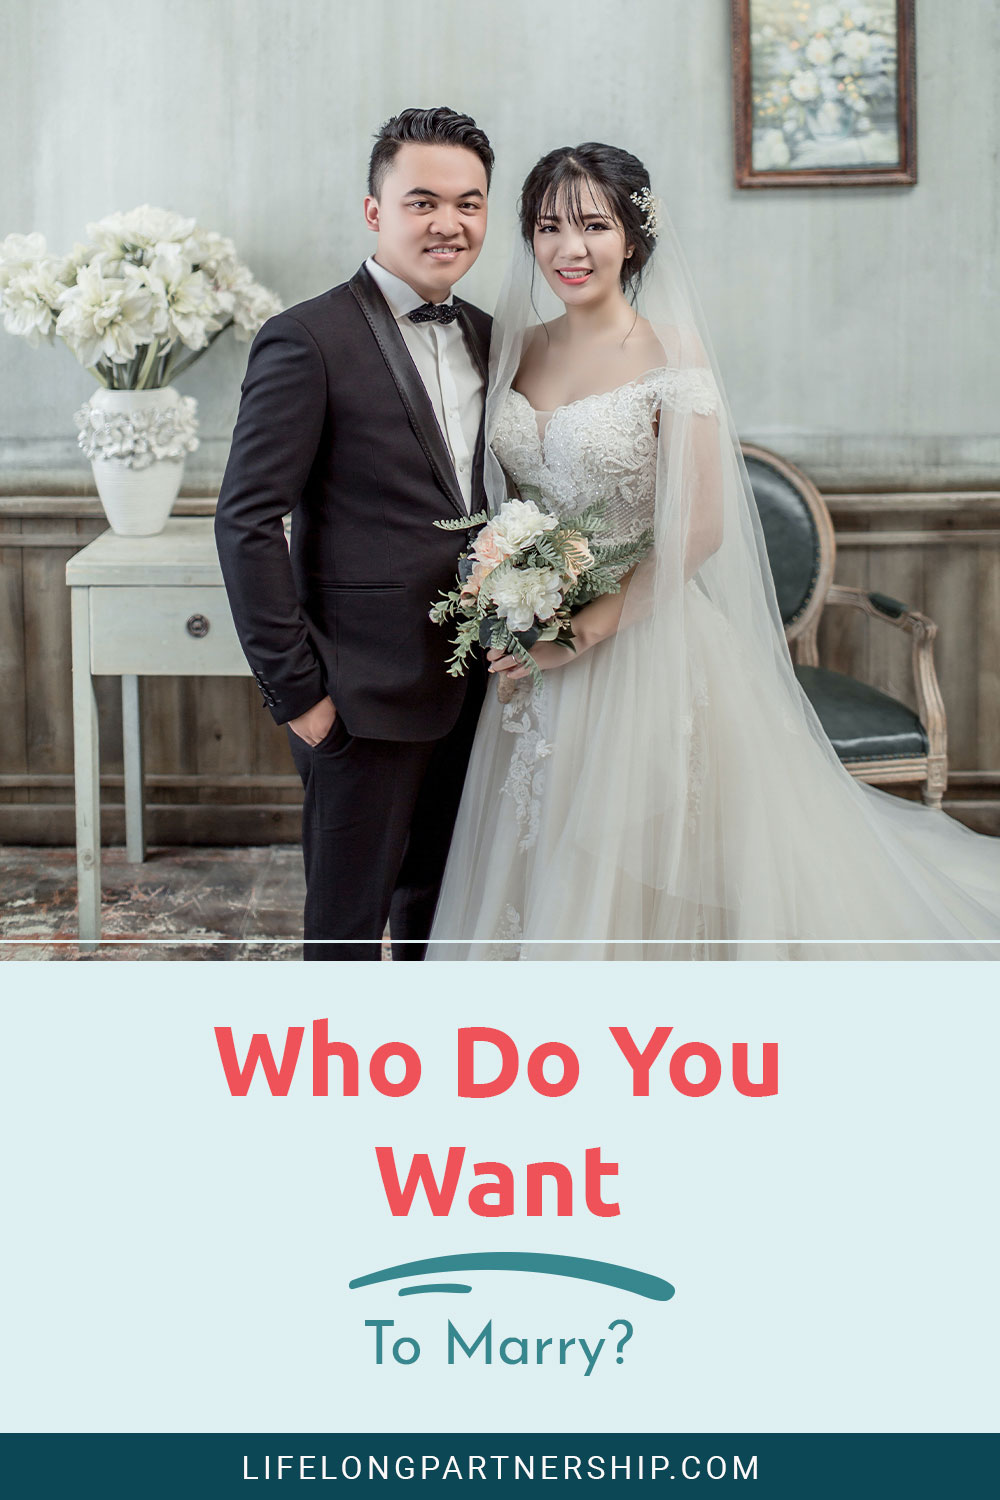 Couple dressed up in wedding dress - Who Do You Want To Marry?